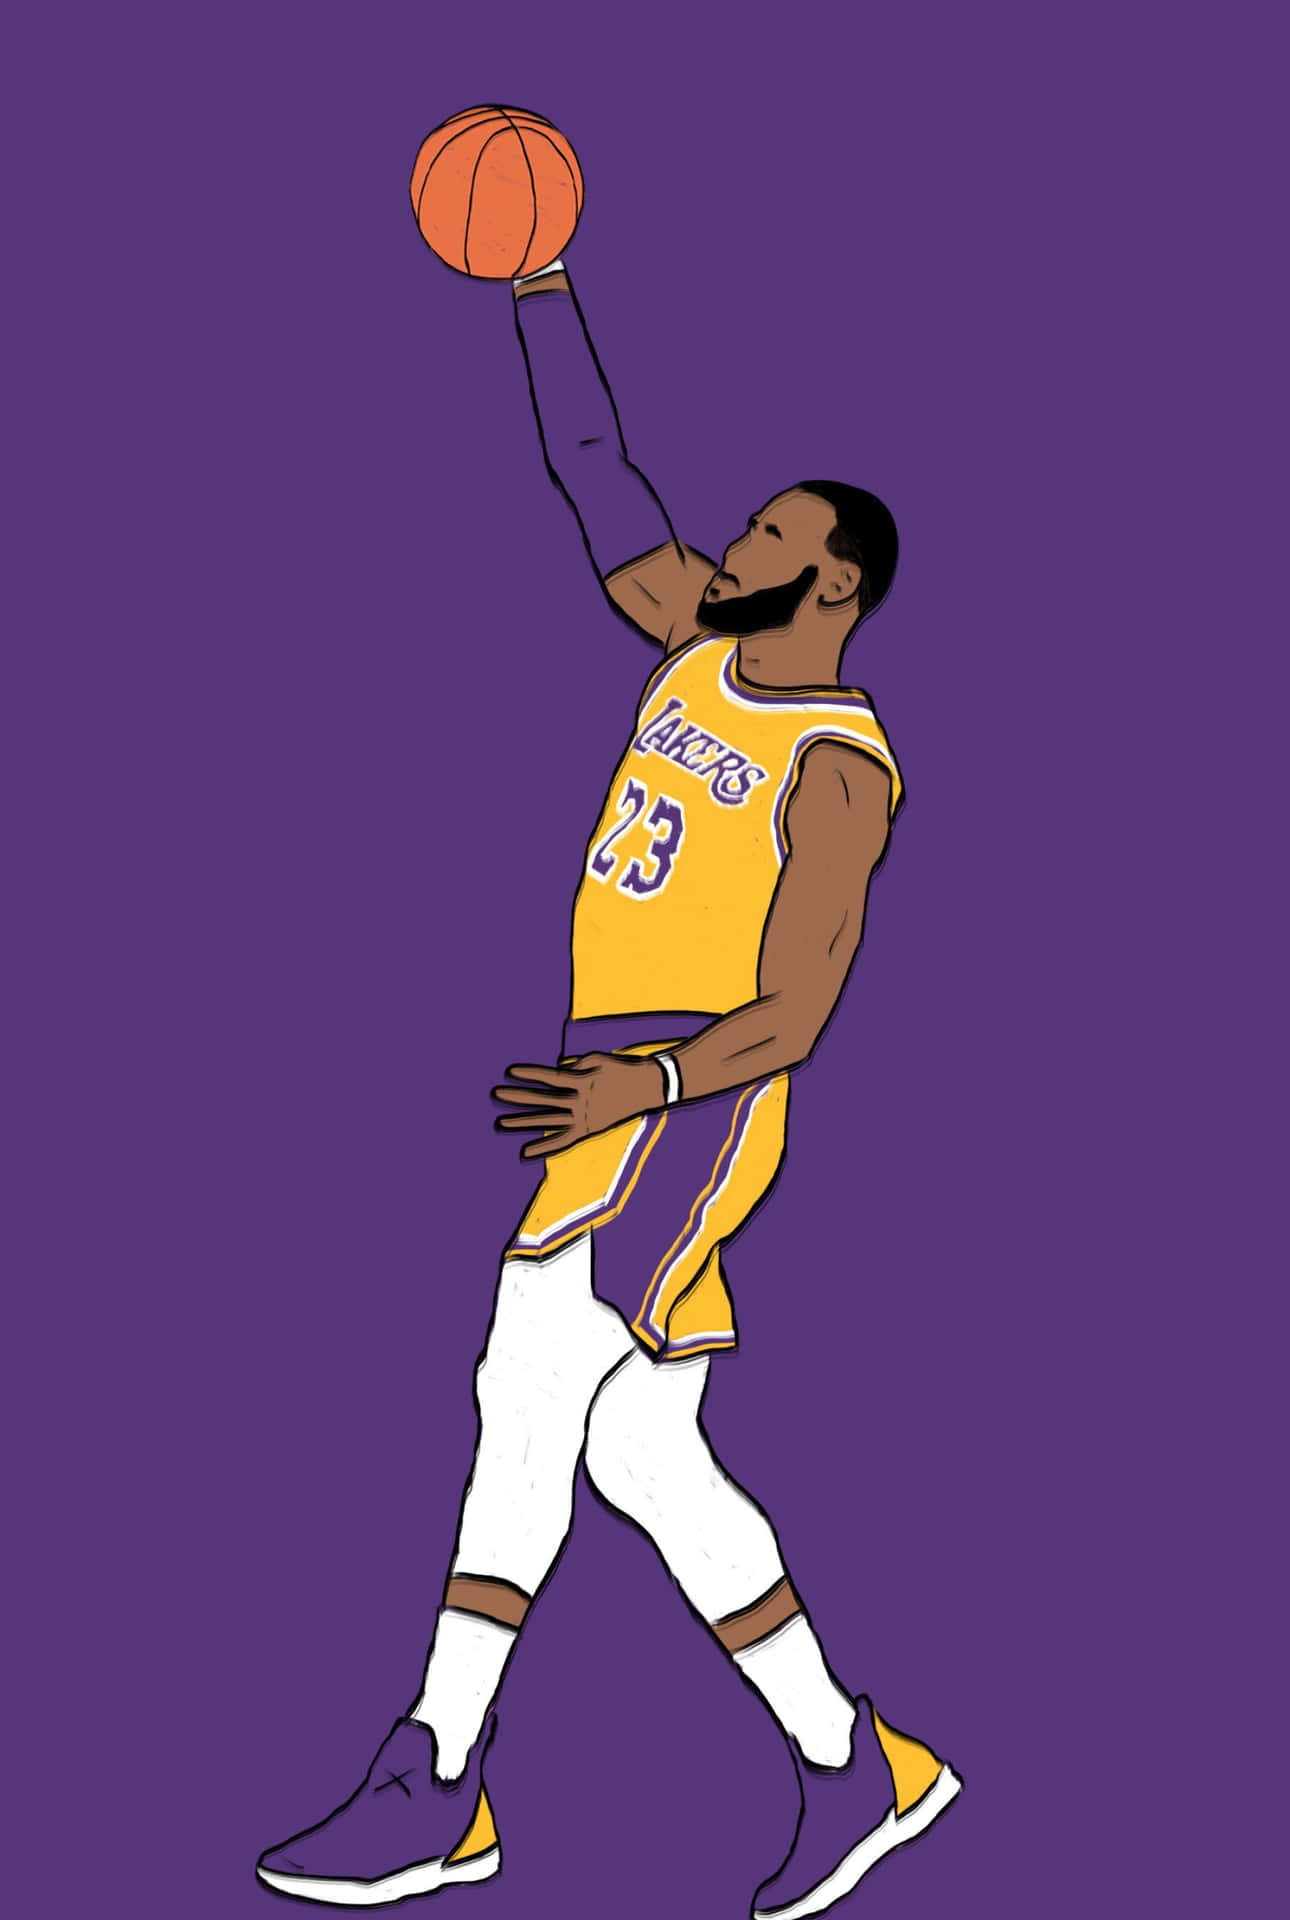 Get your game on with the newest NBA cartoons Wallpaper